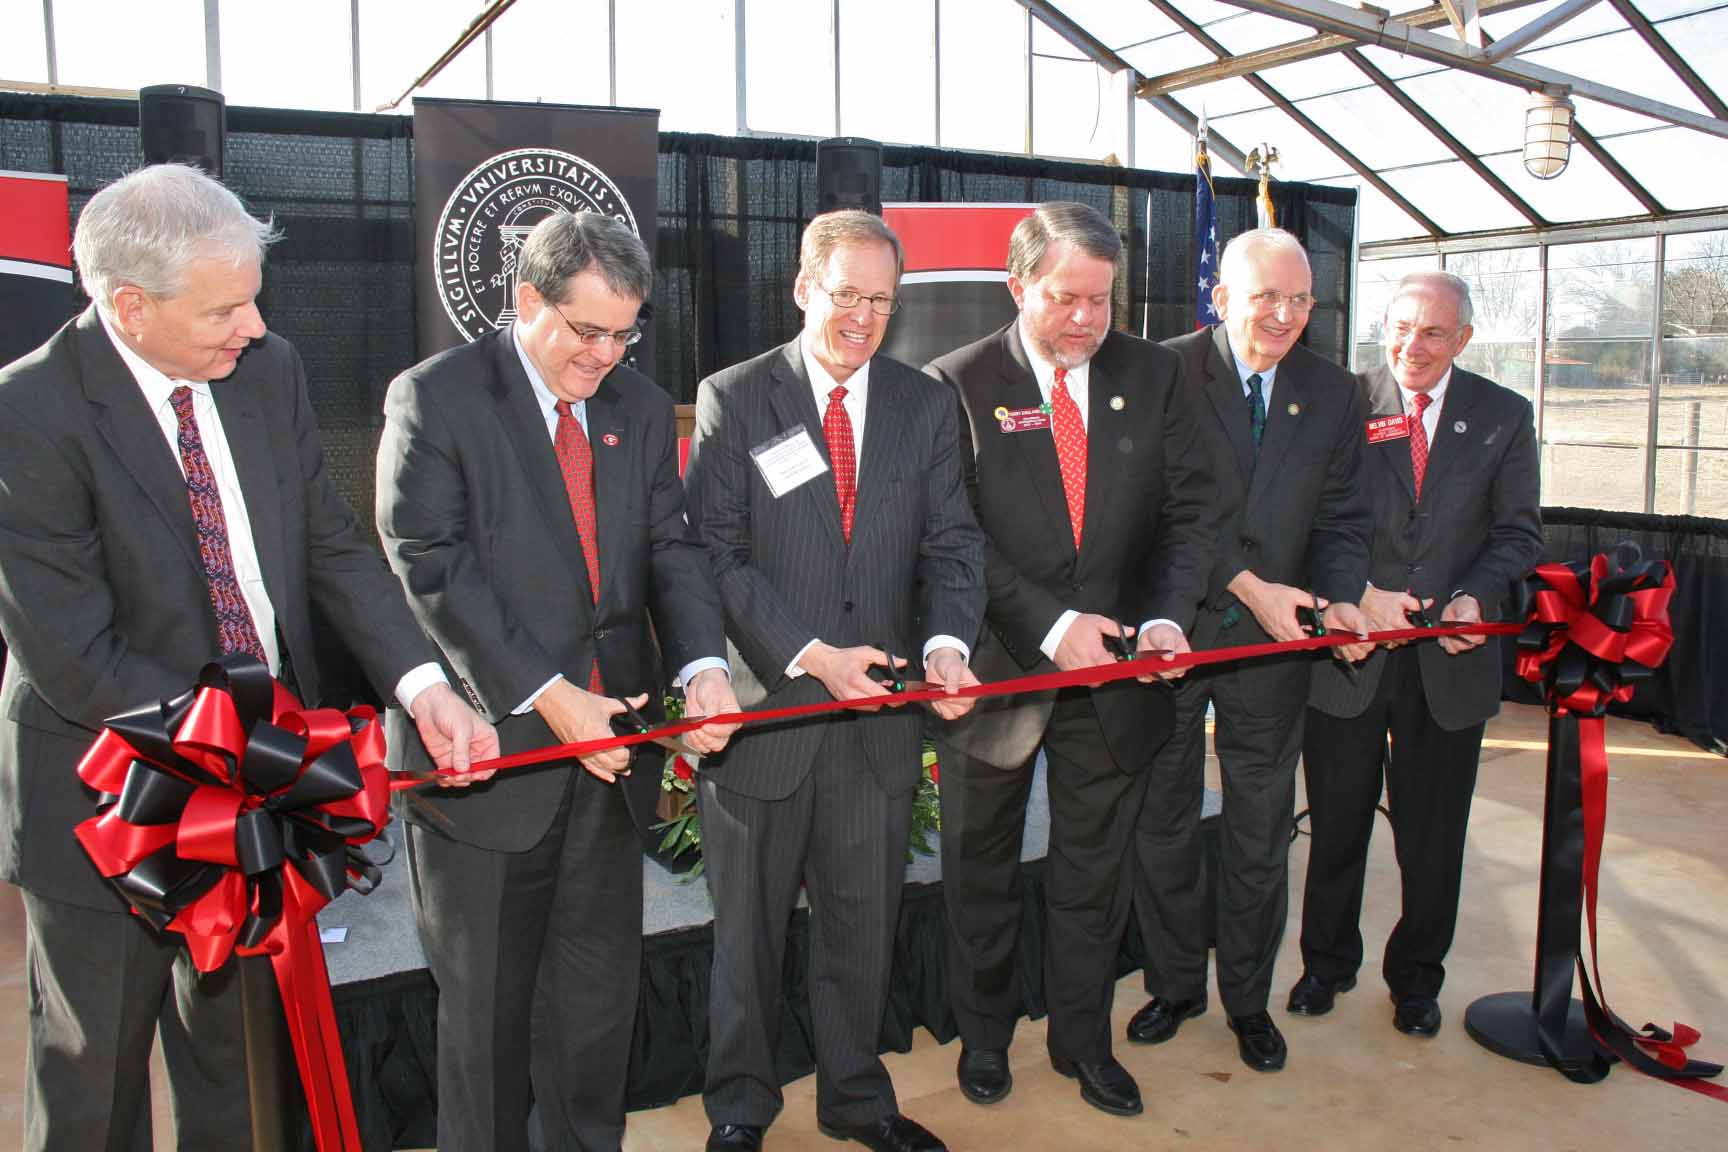 Dean J. Scott Angle, of the UGA College of Agricultural and Environmental Sciences; UGA President Jere Morehead, Rep. Jack Kingston, state Rep. Terry England, Georgia Commissioner of Agriculture Gary Black and Oconee County Commission Chairman Melvin Davis cut a ceremonial ribbon at UGA's J. Phil Campbell Sr. Research and Education Center Tuesday, Jan. 21.